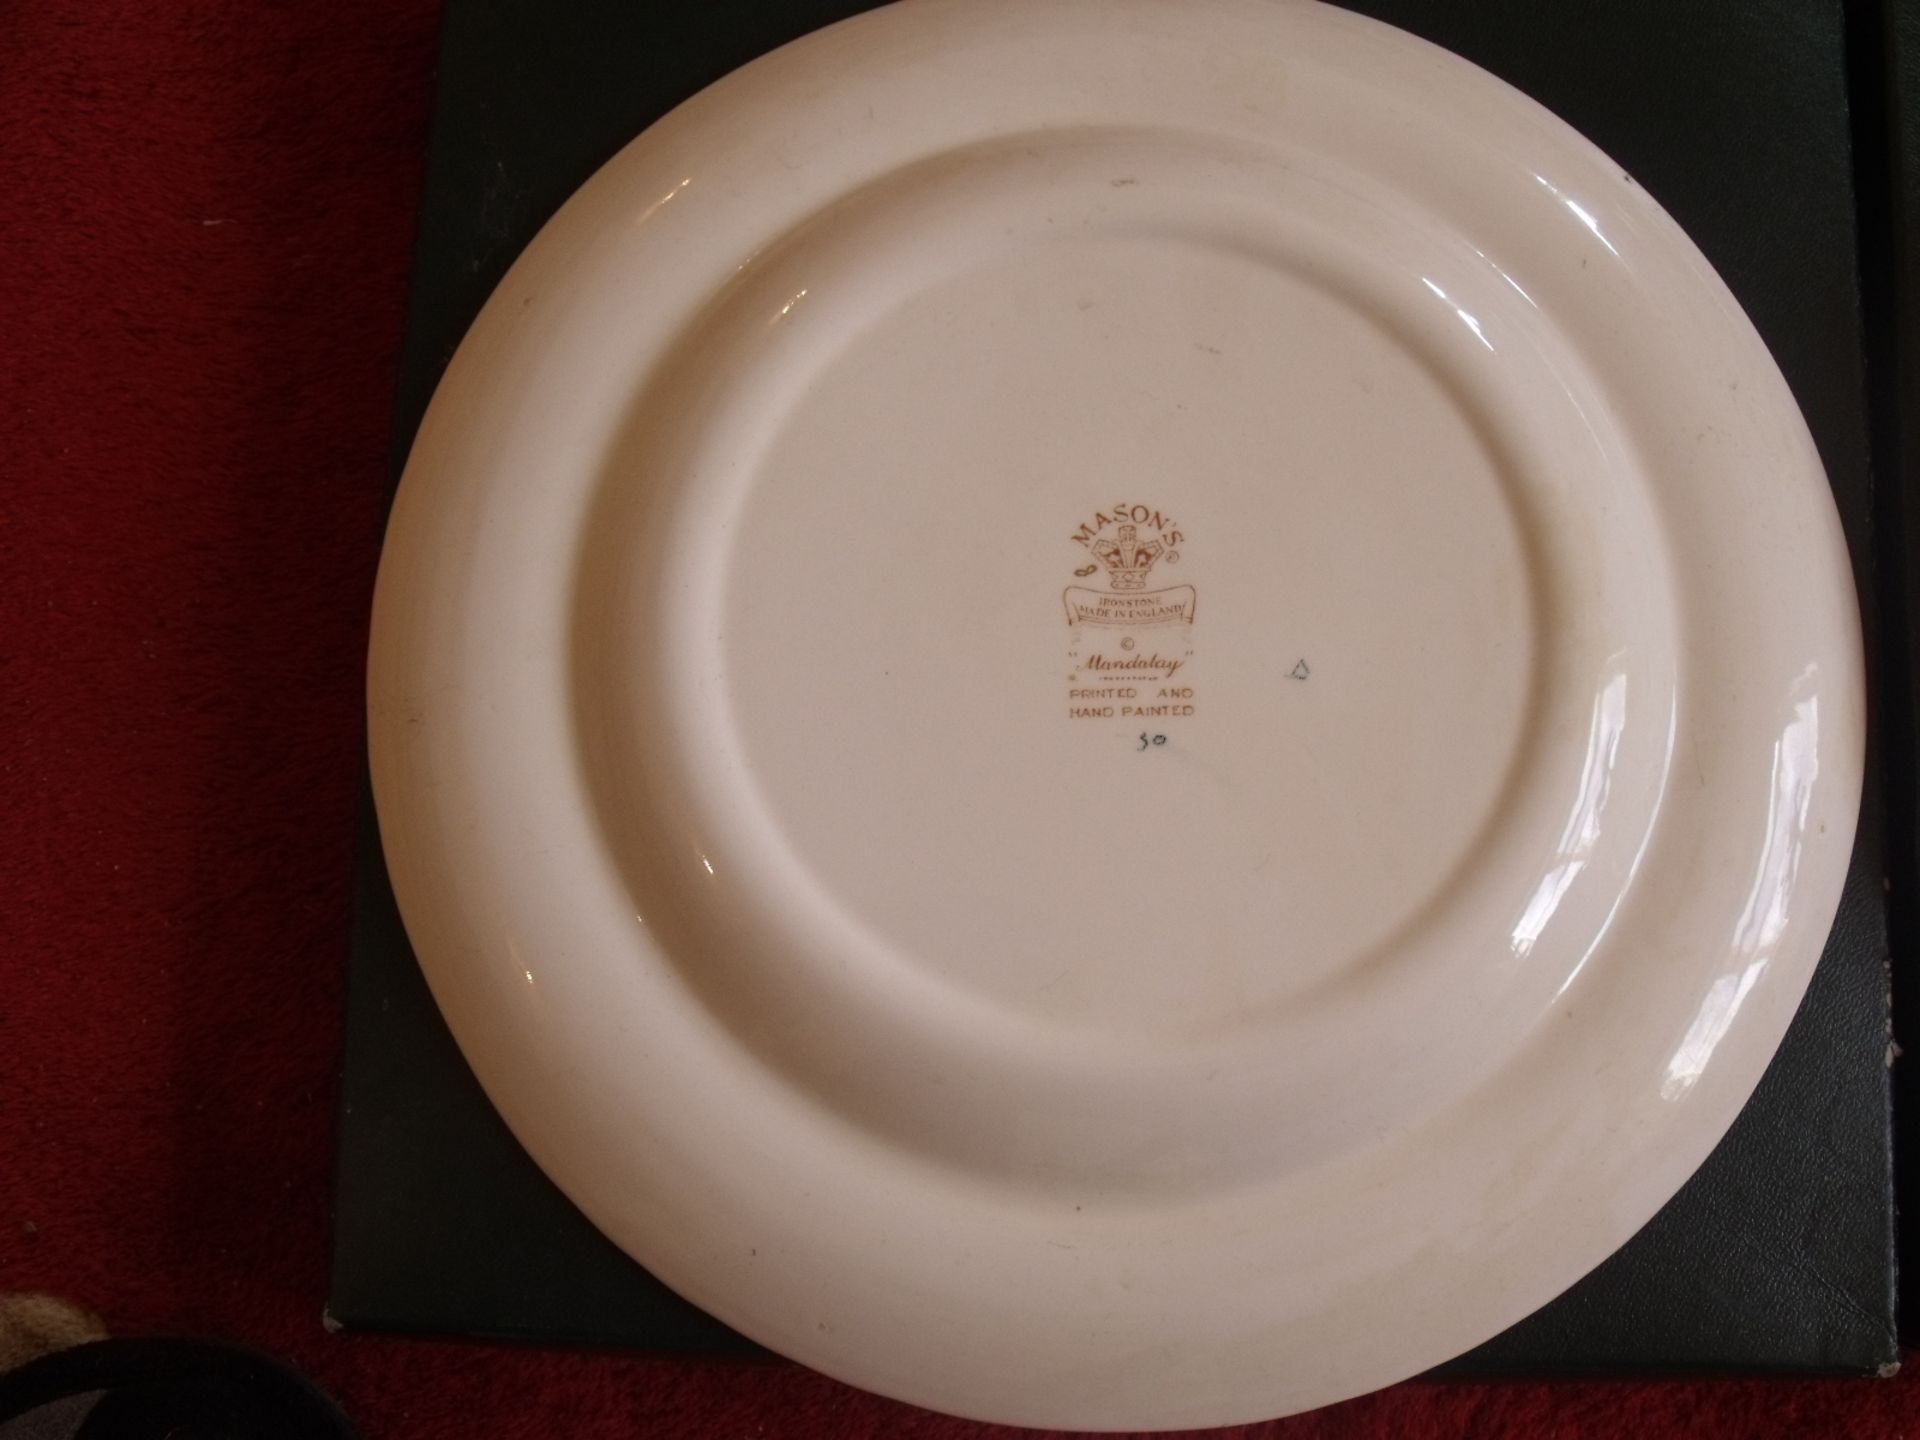 Masons Mandalay Dinner Plate size 265mm very good condition and boxed private collector - No Reserve - Image 2 of 2